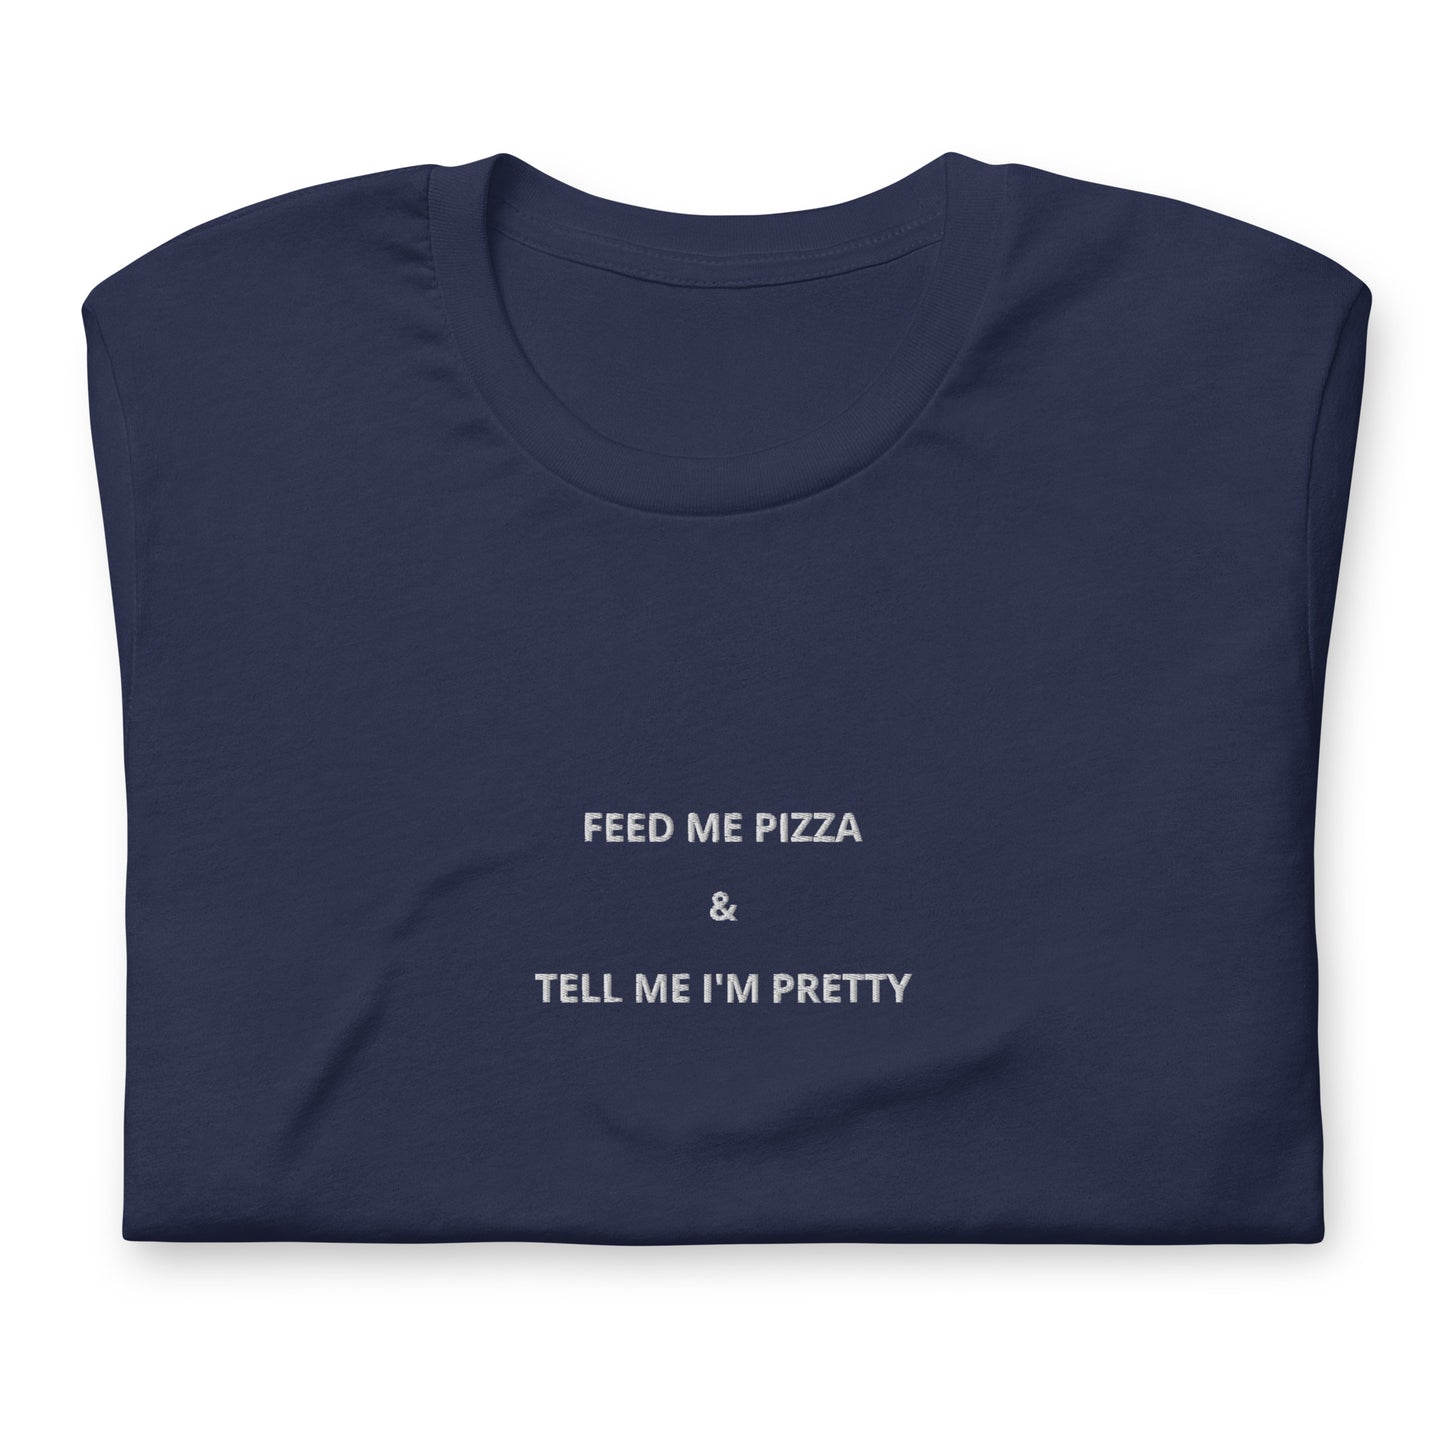 FEED ME PIZZA & TELL ME I'M PRETTY - besticktes T-Shirt